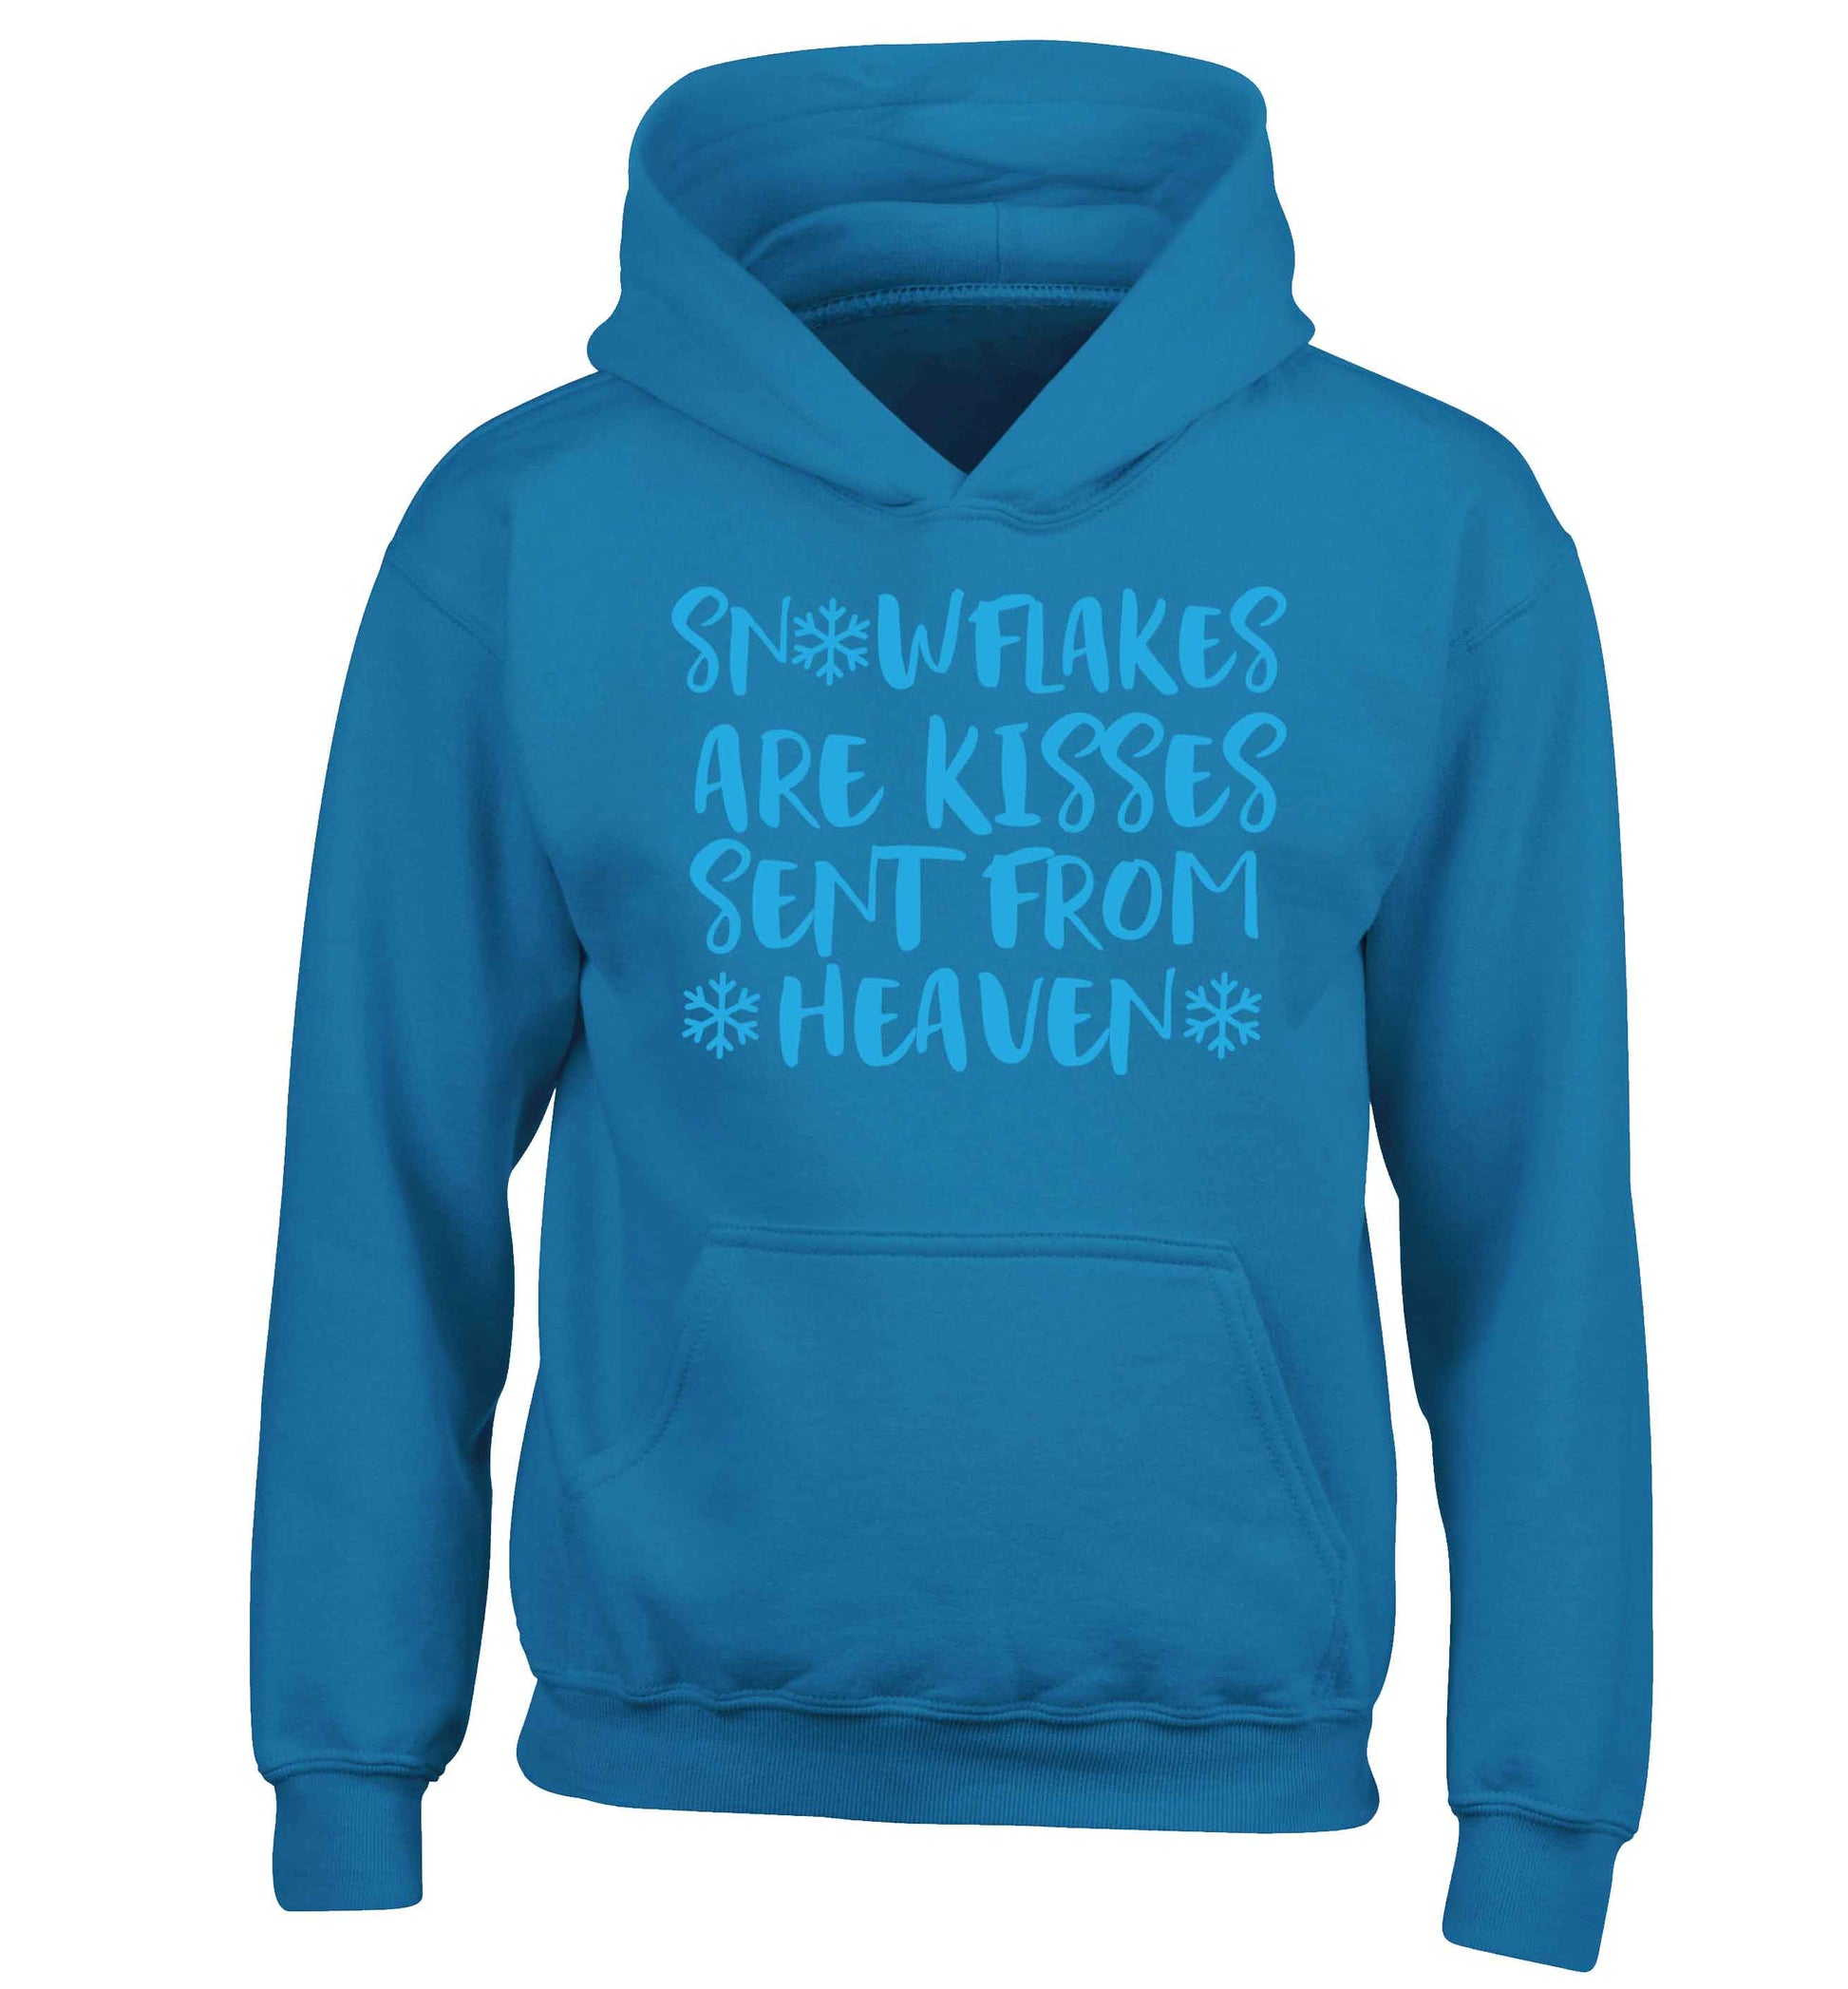 Snowflakes are kisses sent from heaven children's blue hoodie 12-13 Years